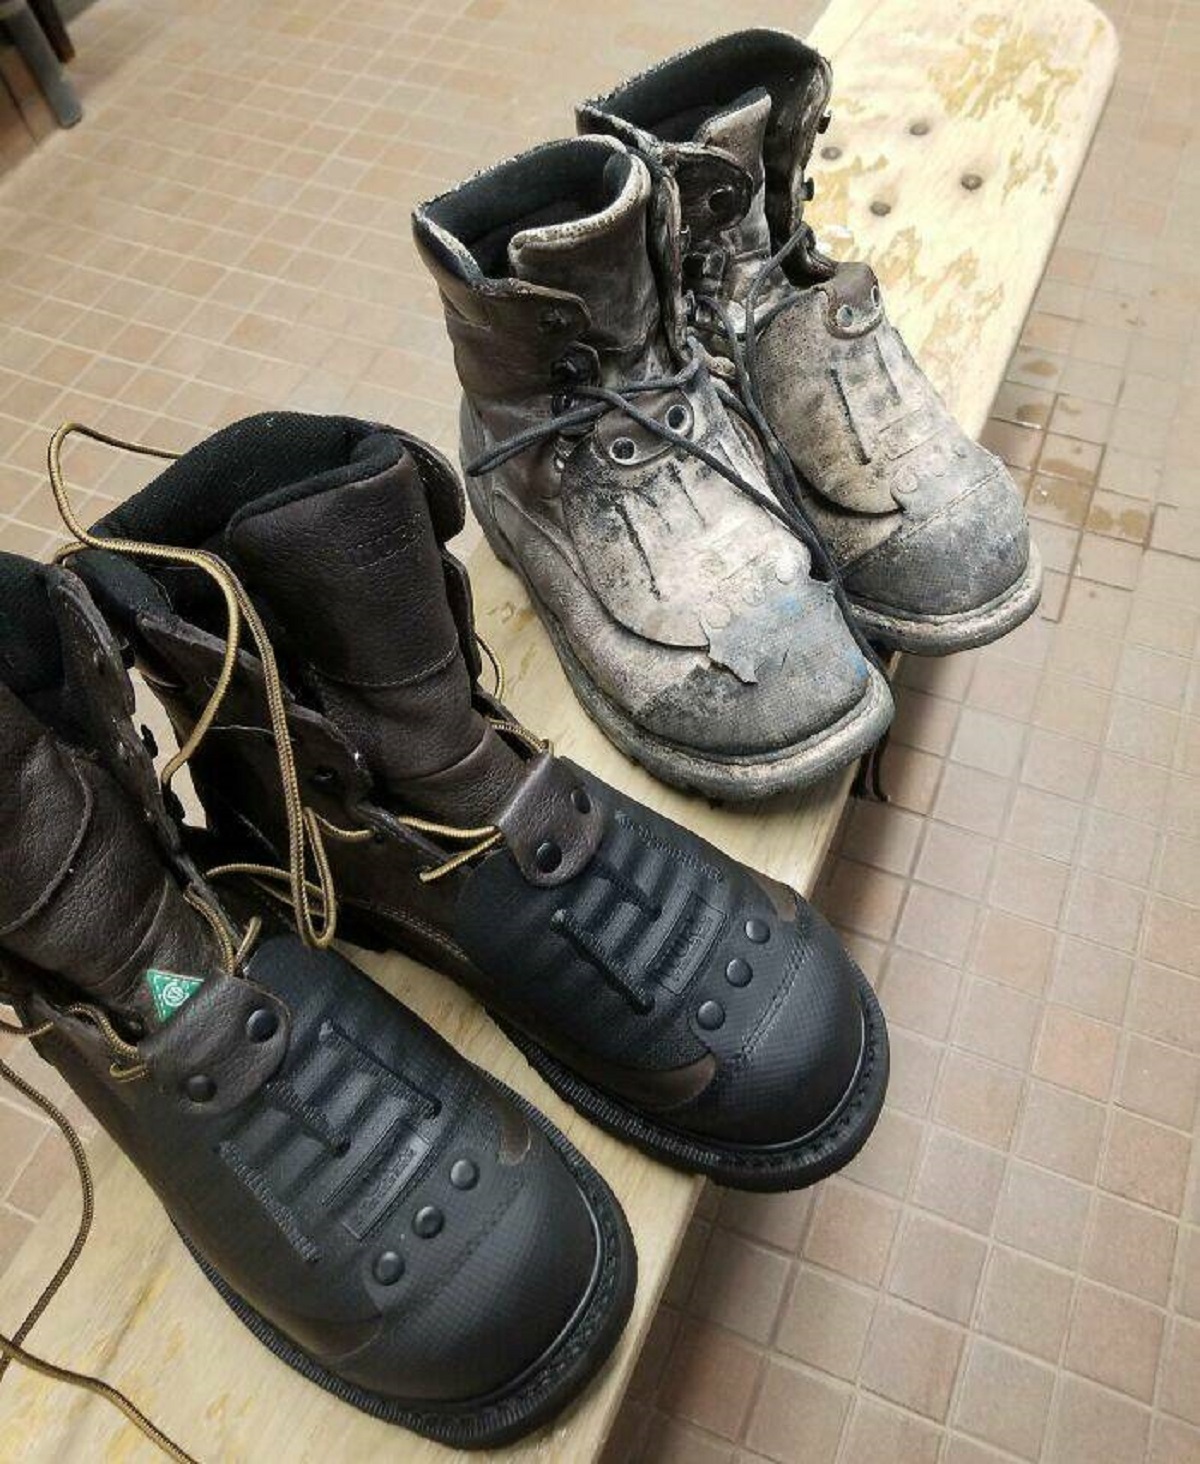 "Same Size, Make And Model Boots, 1 Year Wear And Tear Of Working In A Mine"